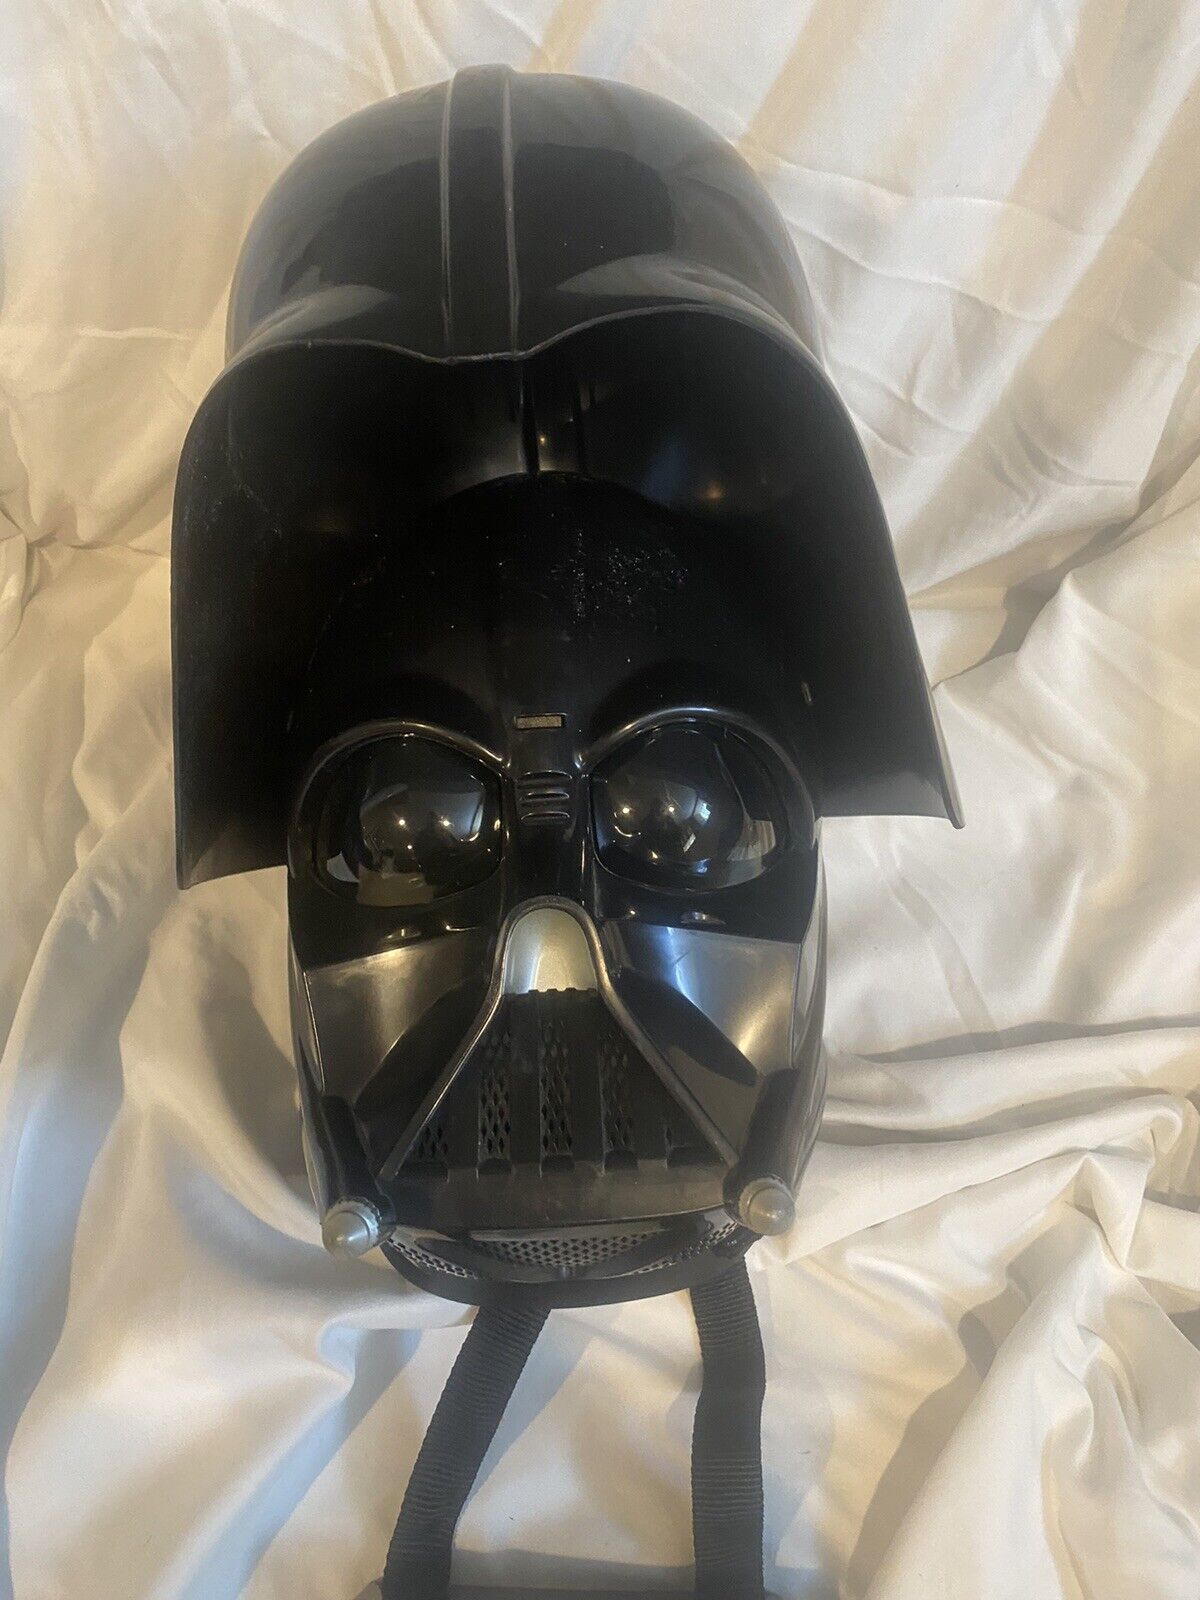 2004 Star Wars Darth Vader Mask With Voice Changer & Removable Helmet Works Well